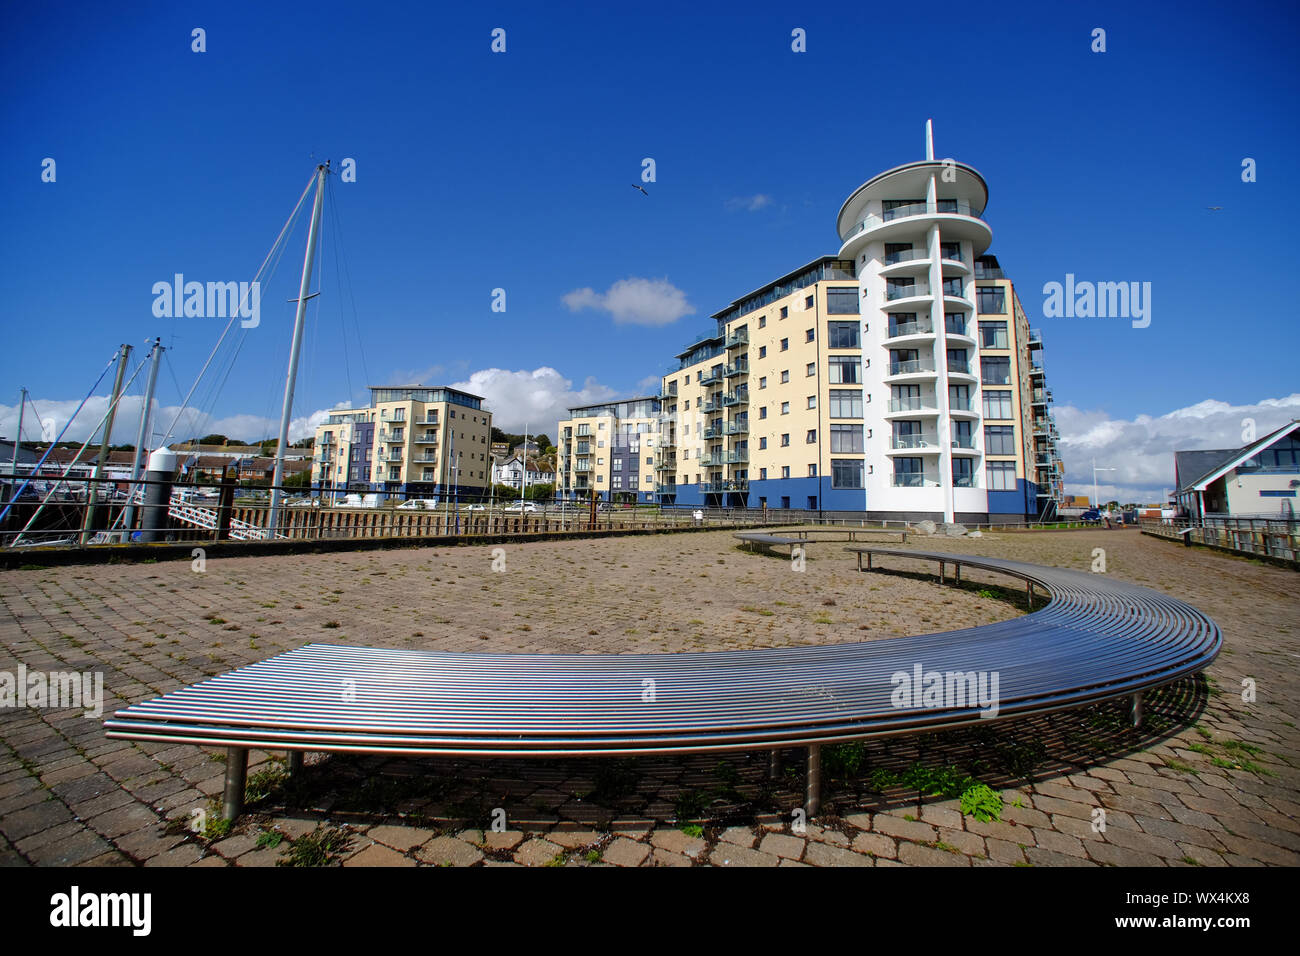 Apartments in Newhaven Marina, East Sussex, UK Stock Photo